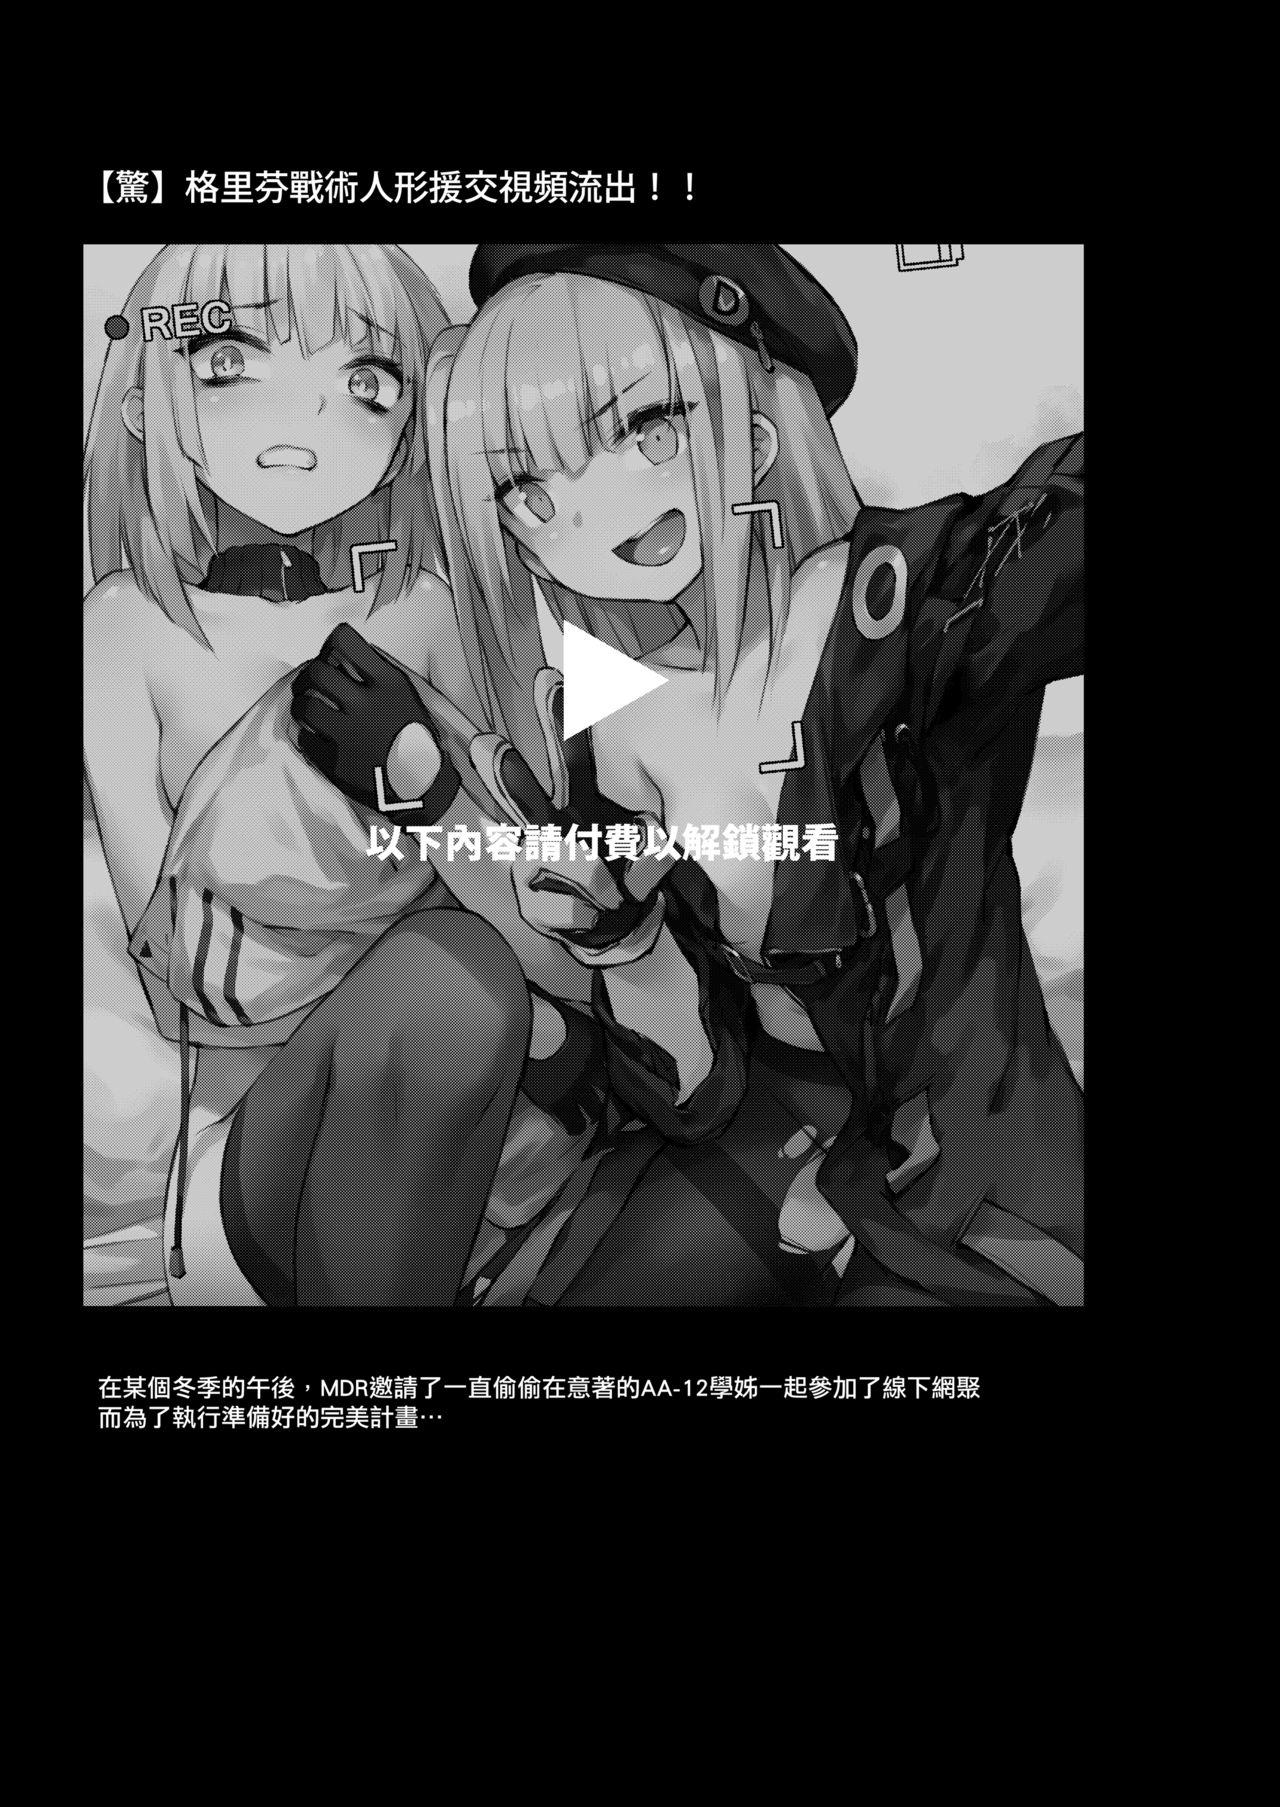 Teenage Porn A Video of Griffin T-Dolls Having Sex For Money Just Leaked! - Girls frontline Smooth - Page 2